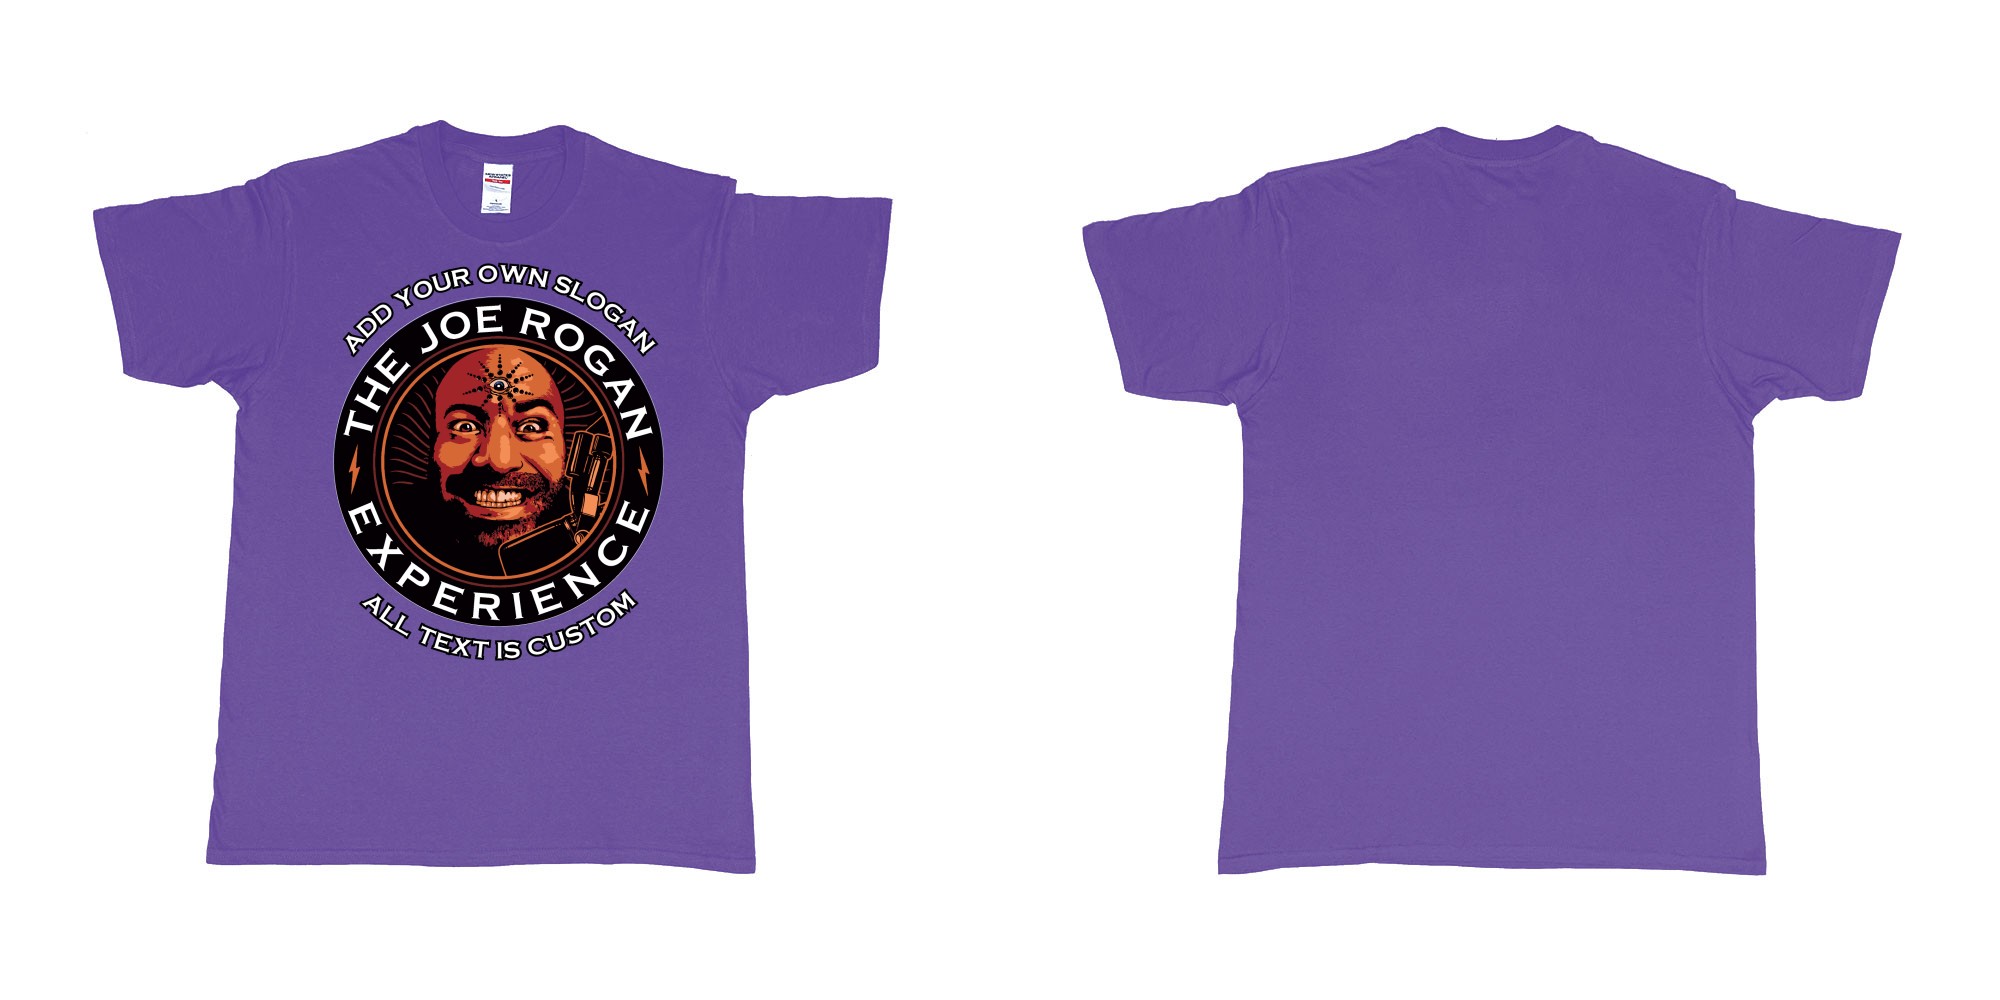 Custom tshirt design the joe rogan experience custom tshirt in fabric color purple choice your own text made in Bali by The Pirate Way